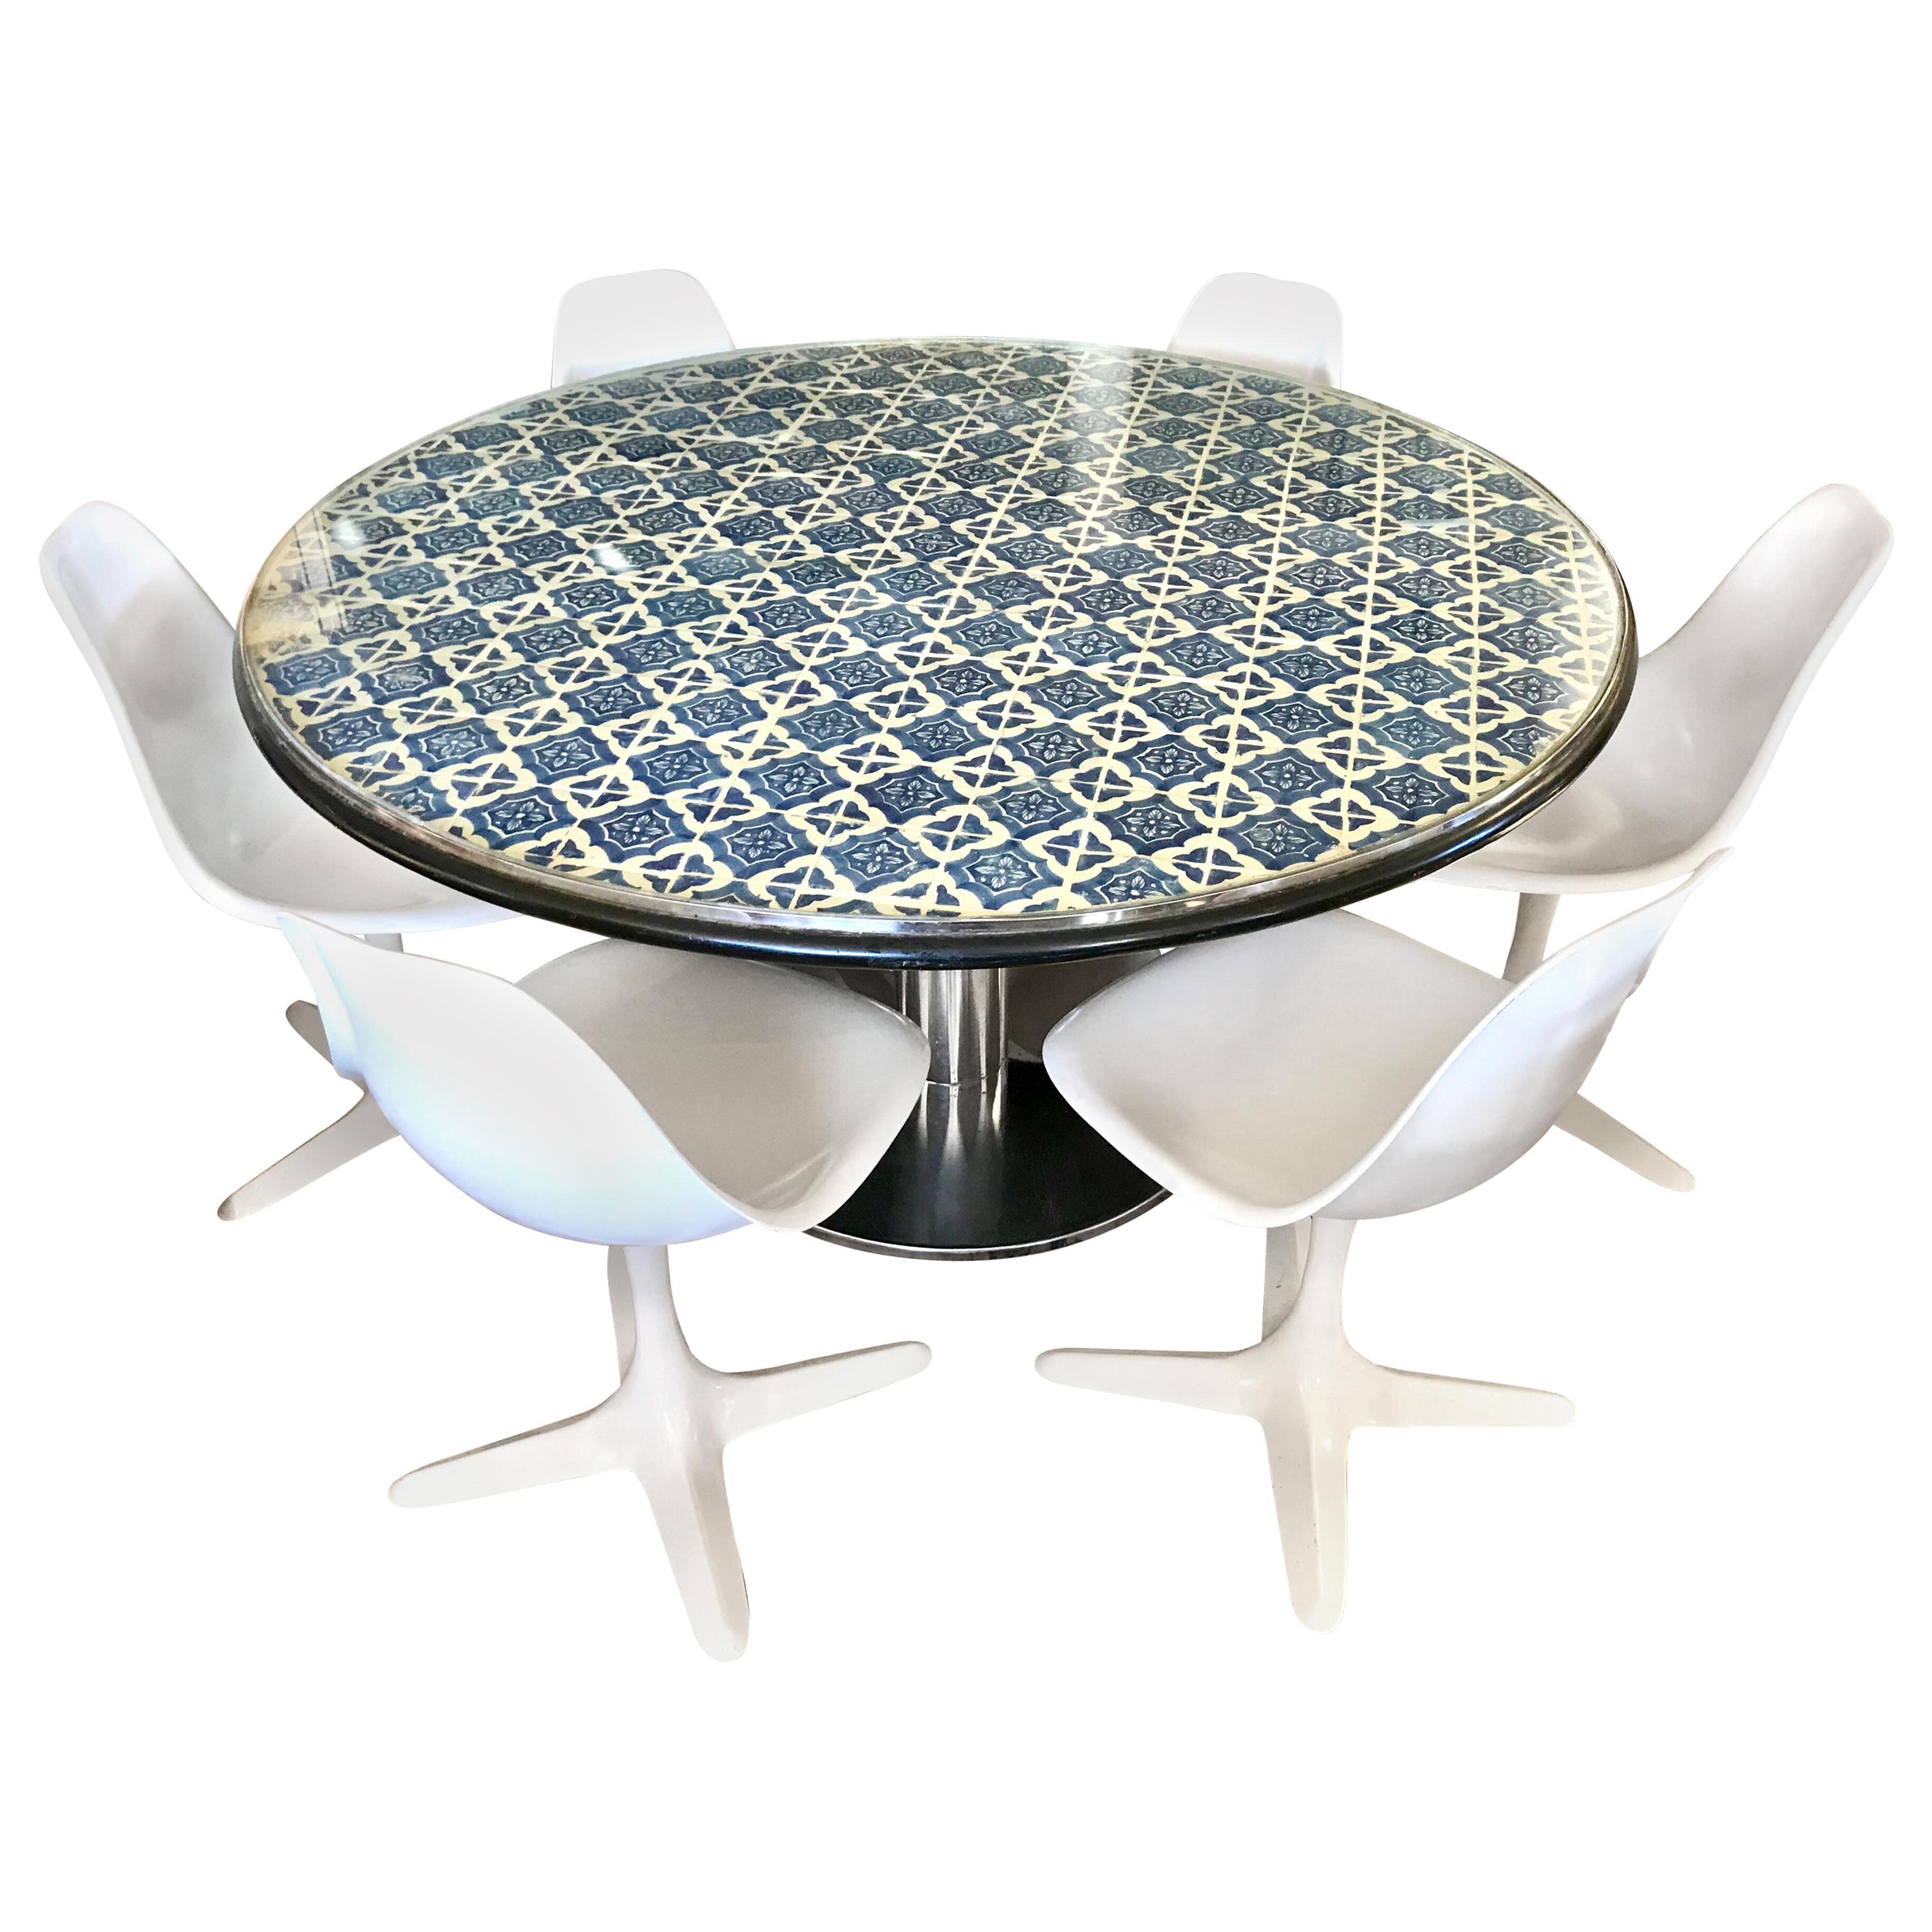 Midcentury Blue and White Spanish Tile Top Table and Six Saarinen Tulip Chairs